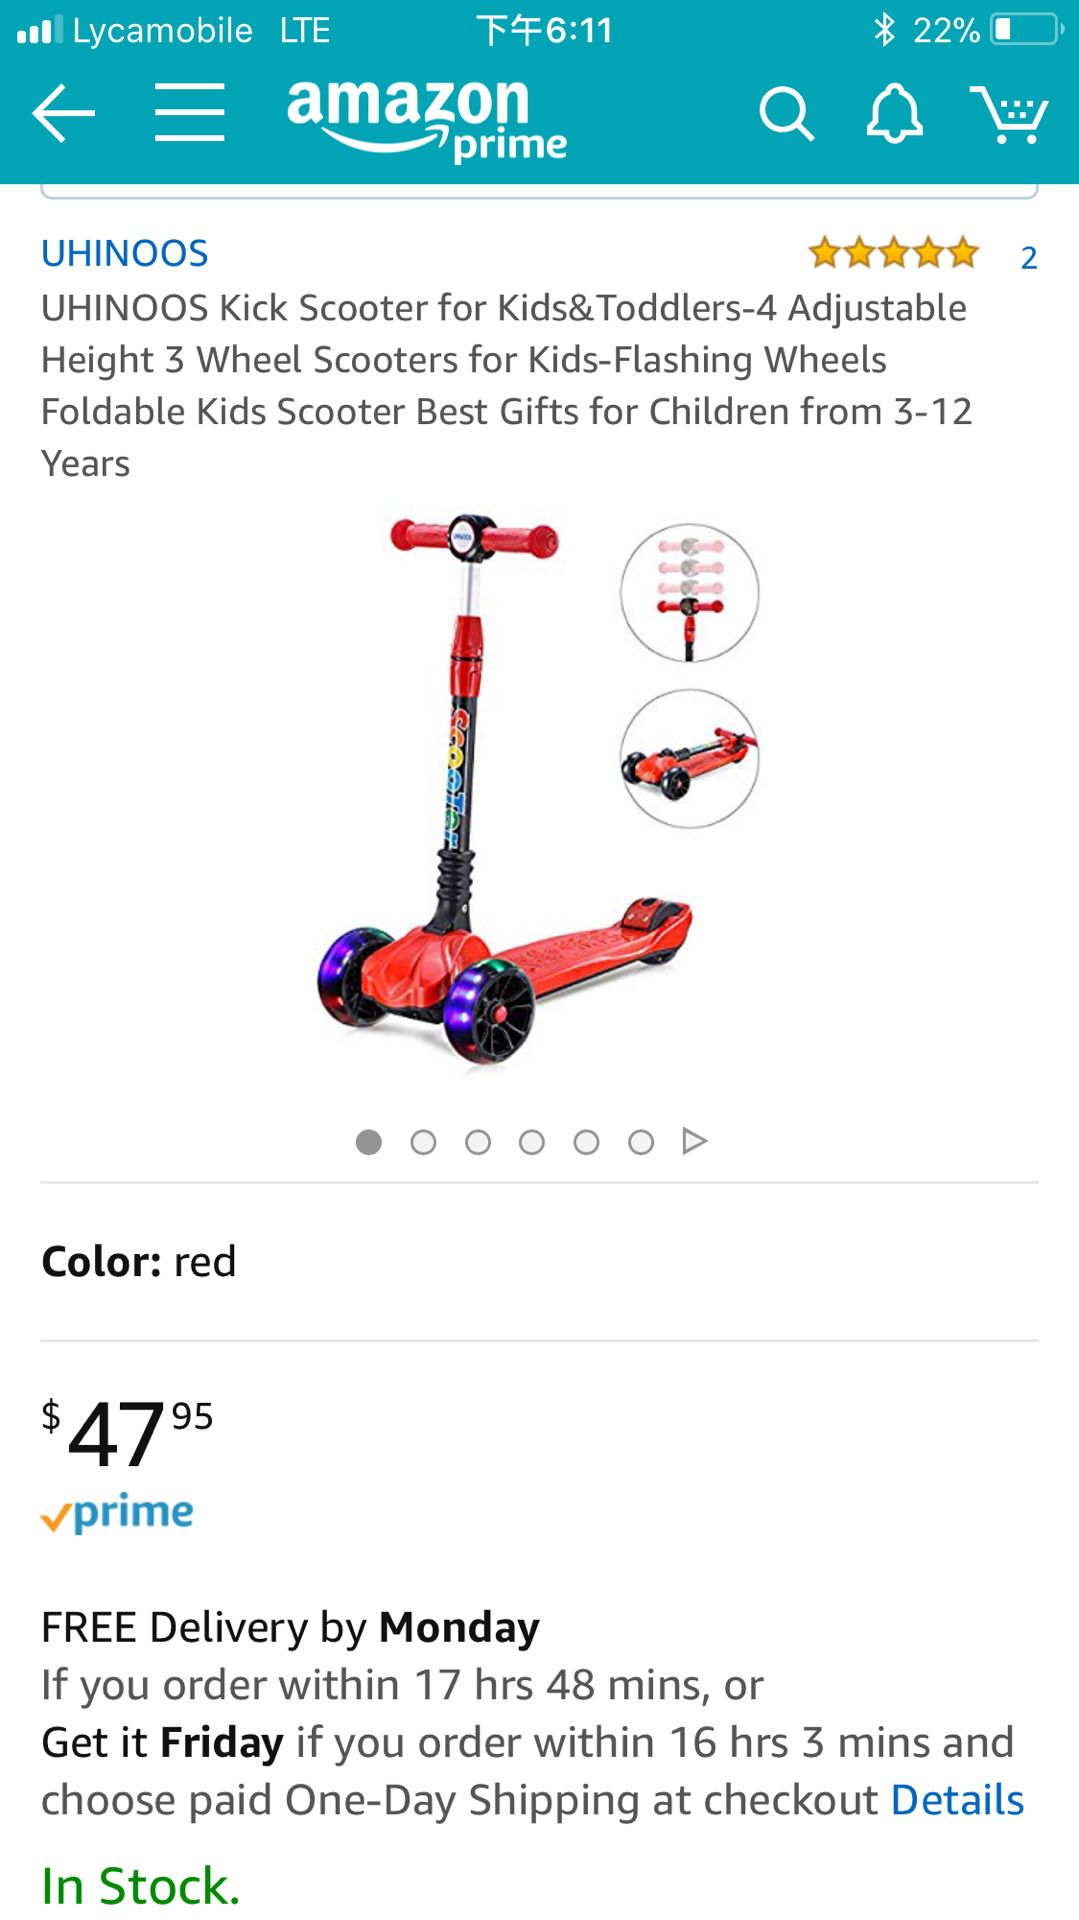 Brand new UHINOOS Kick Scooter for Kids&Toddlers